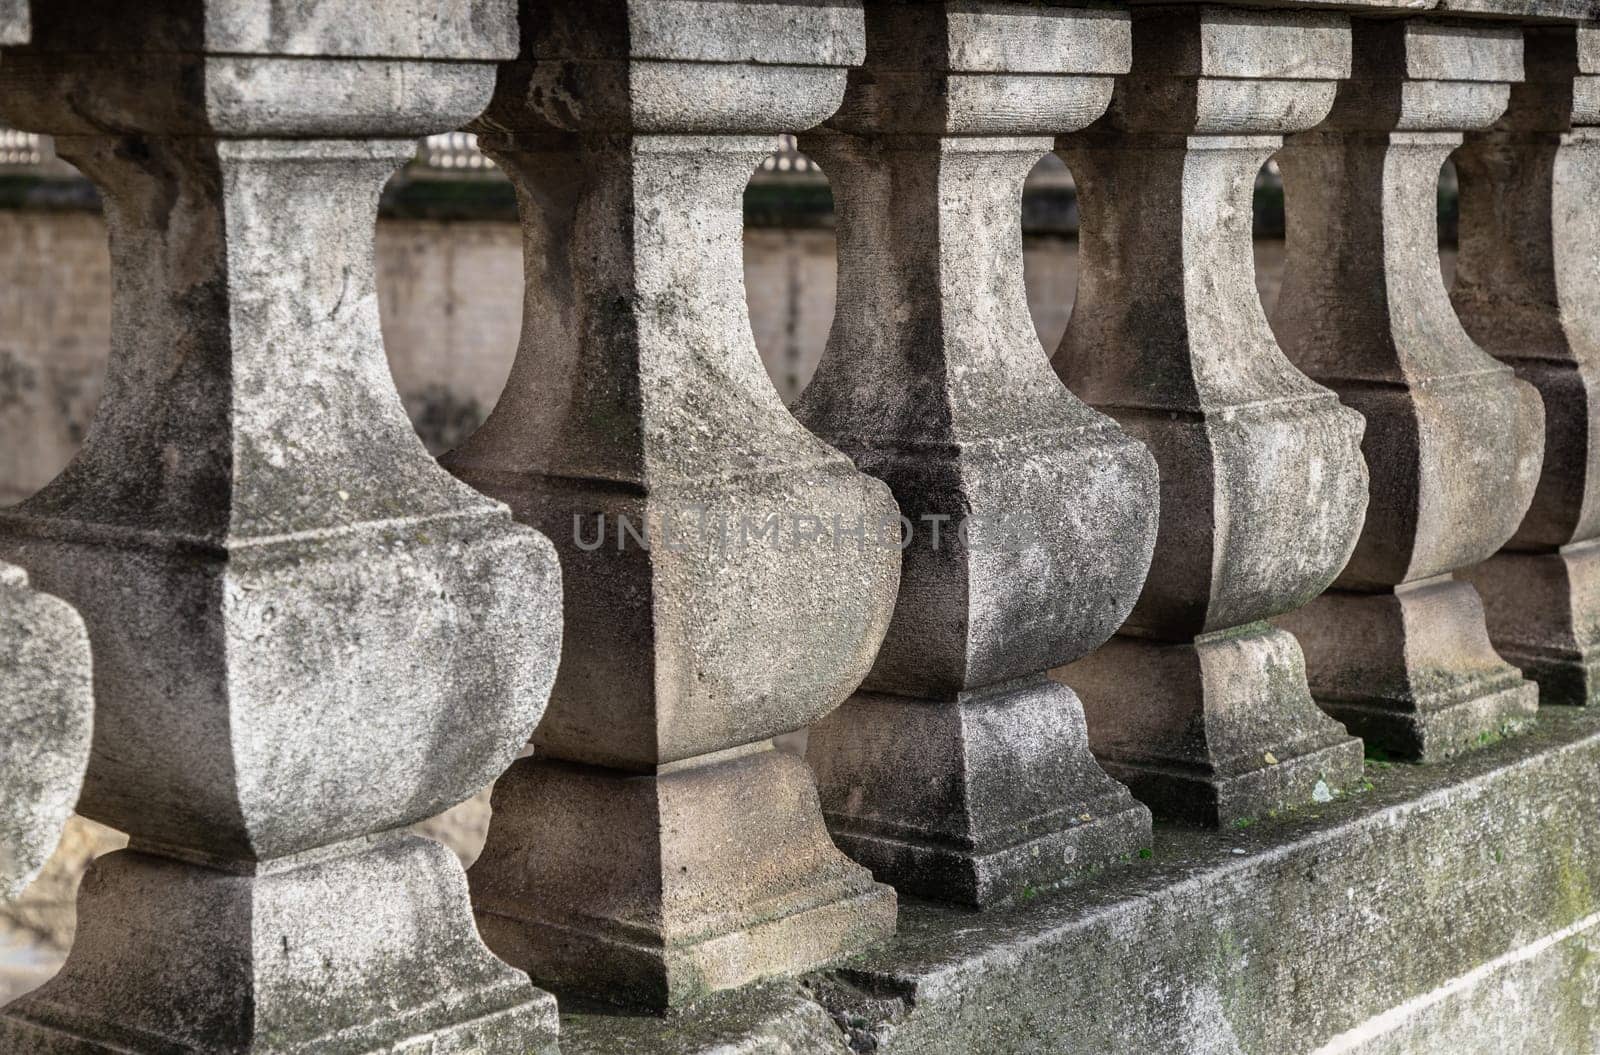 France, Paris - Jan 04, 2024 - Row of Old stone railings. Ancient architecture of Victorian stone balusters, Classical pillars supporting, Balustrade of stone columns, Space for text, Selective focus.